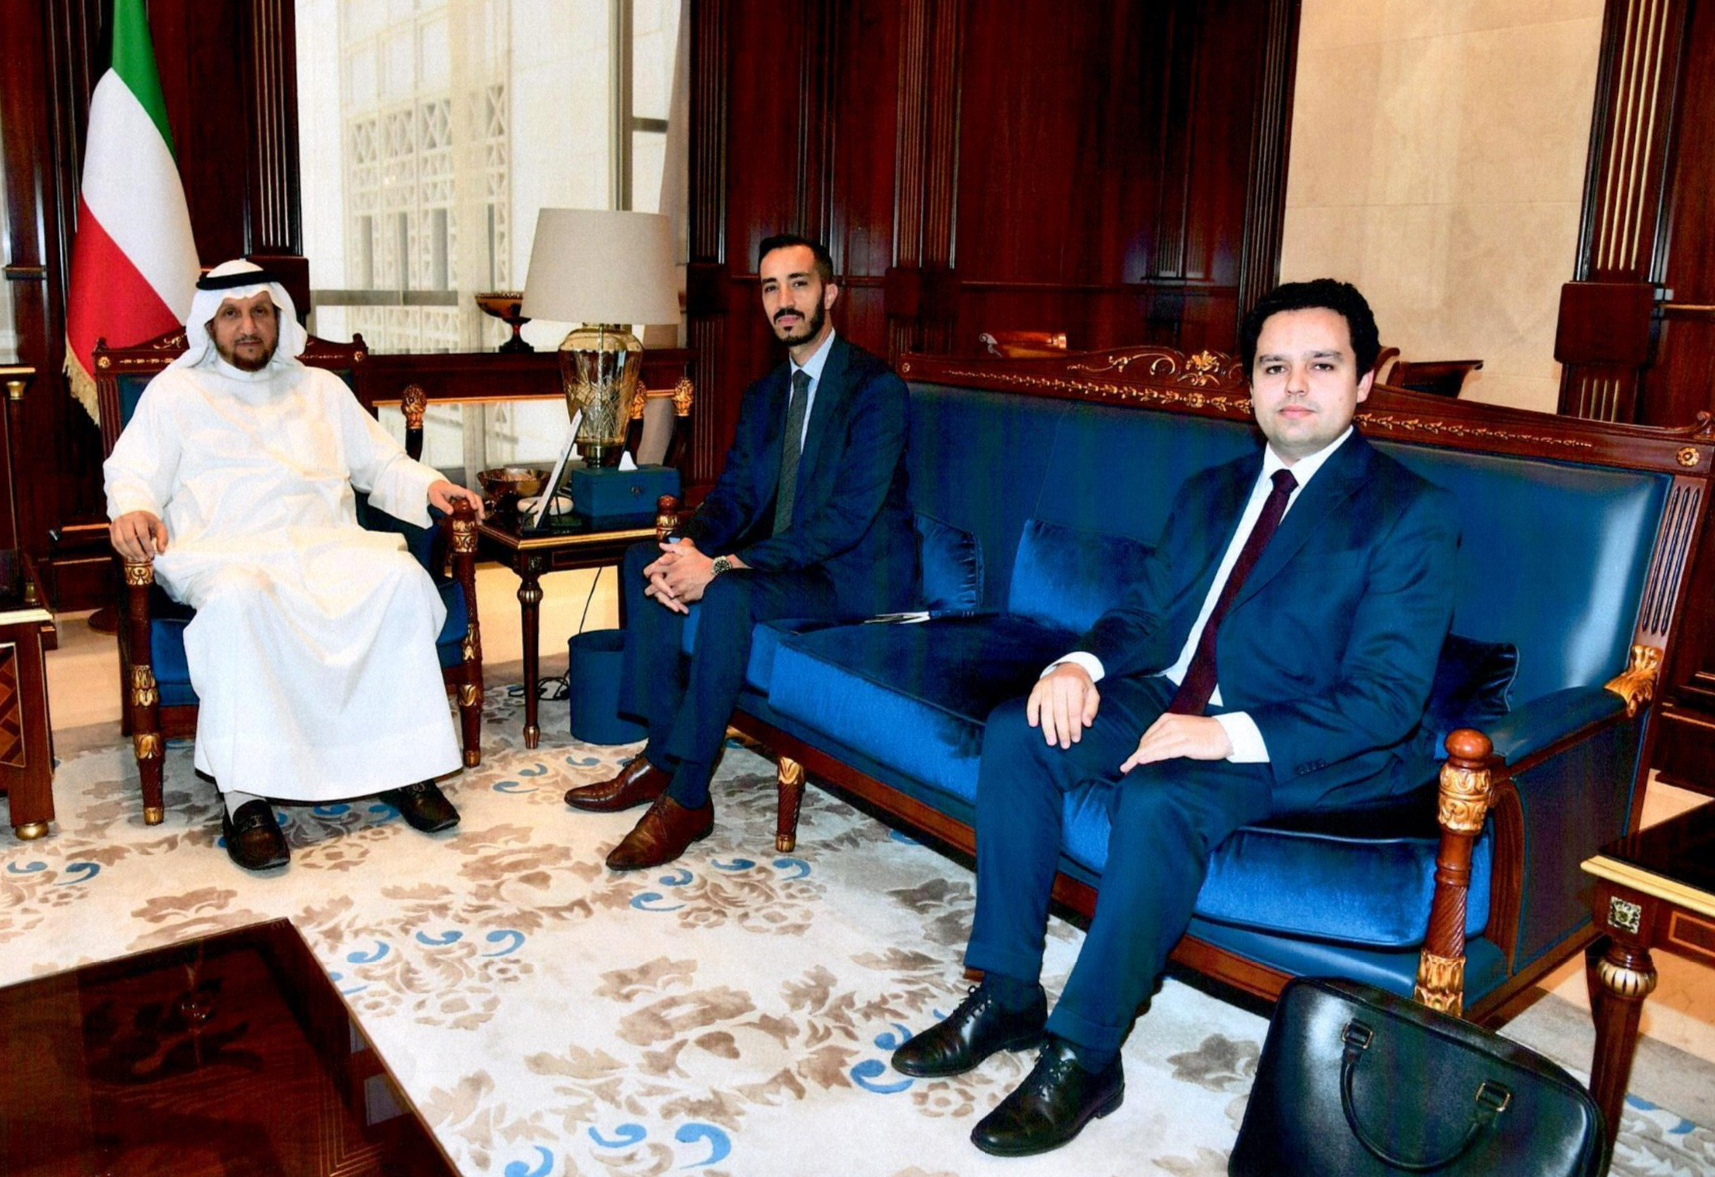 Kuwaiti Deputy Prime Minister and Minister of State for Cabinet Affairs Shereeda Al- Mousherji meets with French Charge d'Affaires in Kuwait Bassam Khadrawi